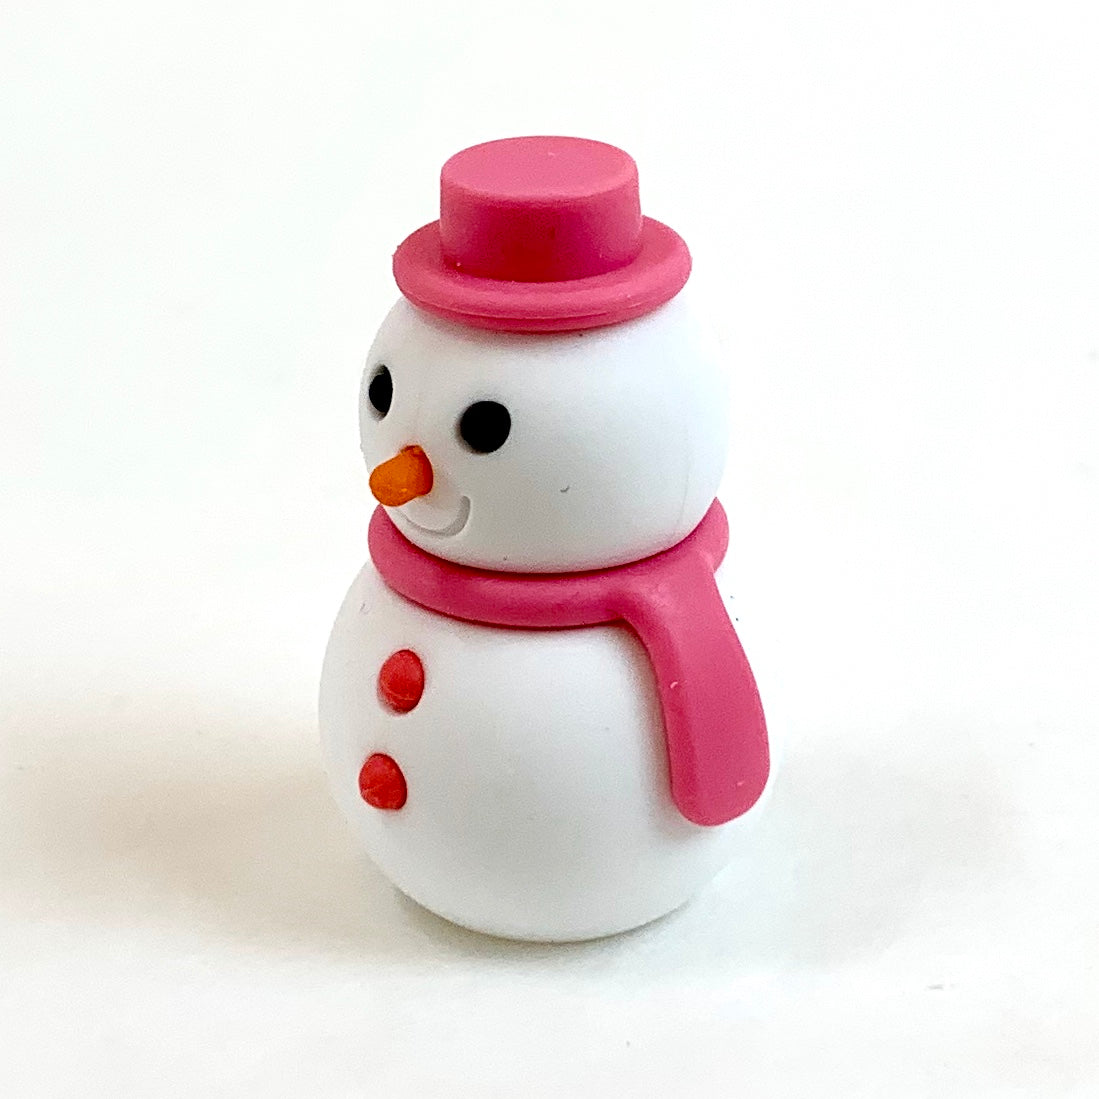 Snowman Mini Erasers - Stationery - 144 Pieces